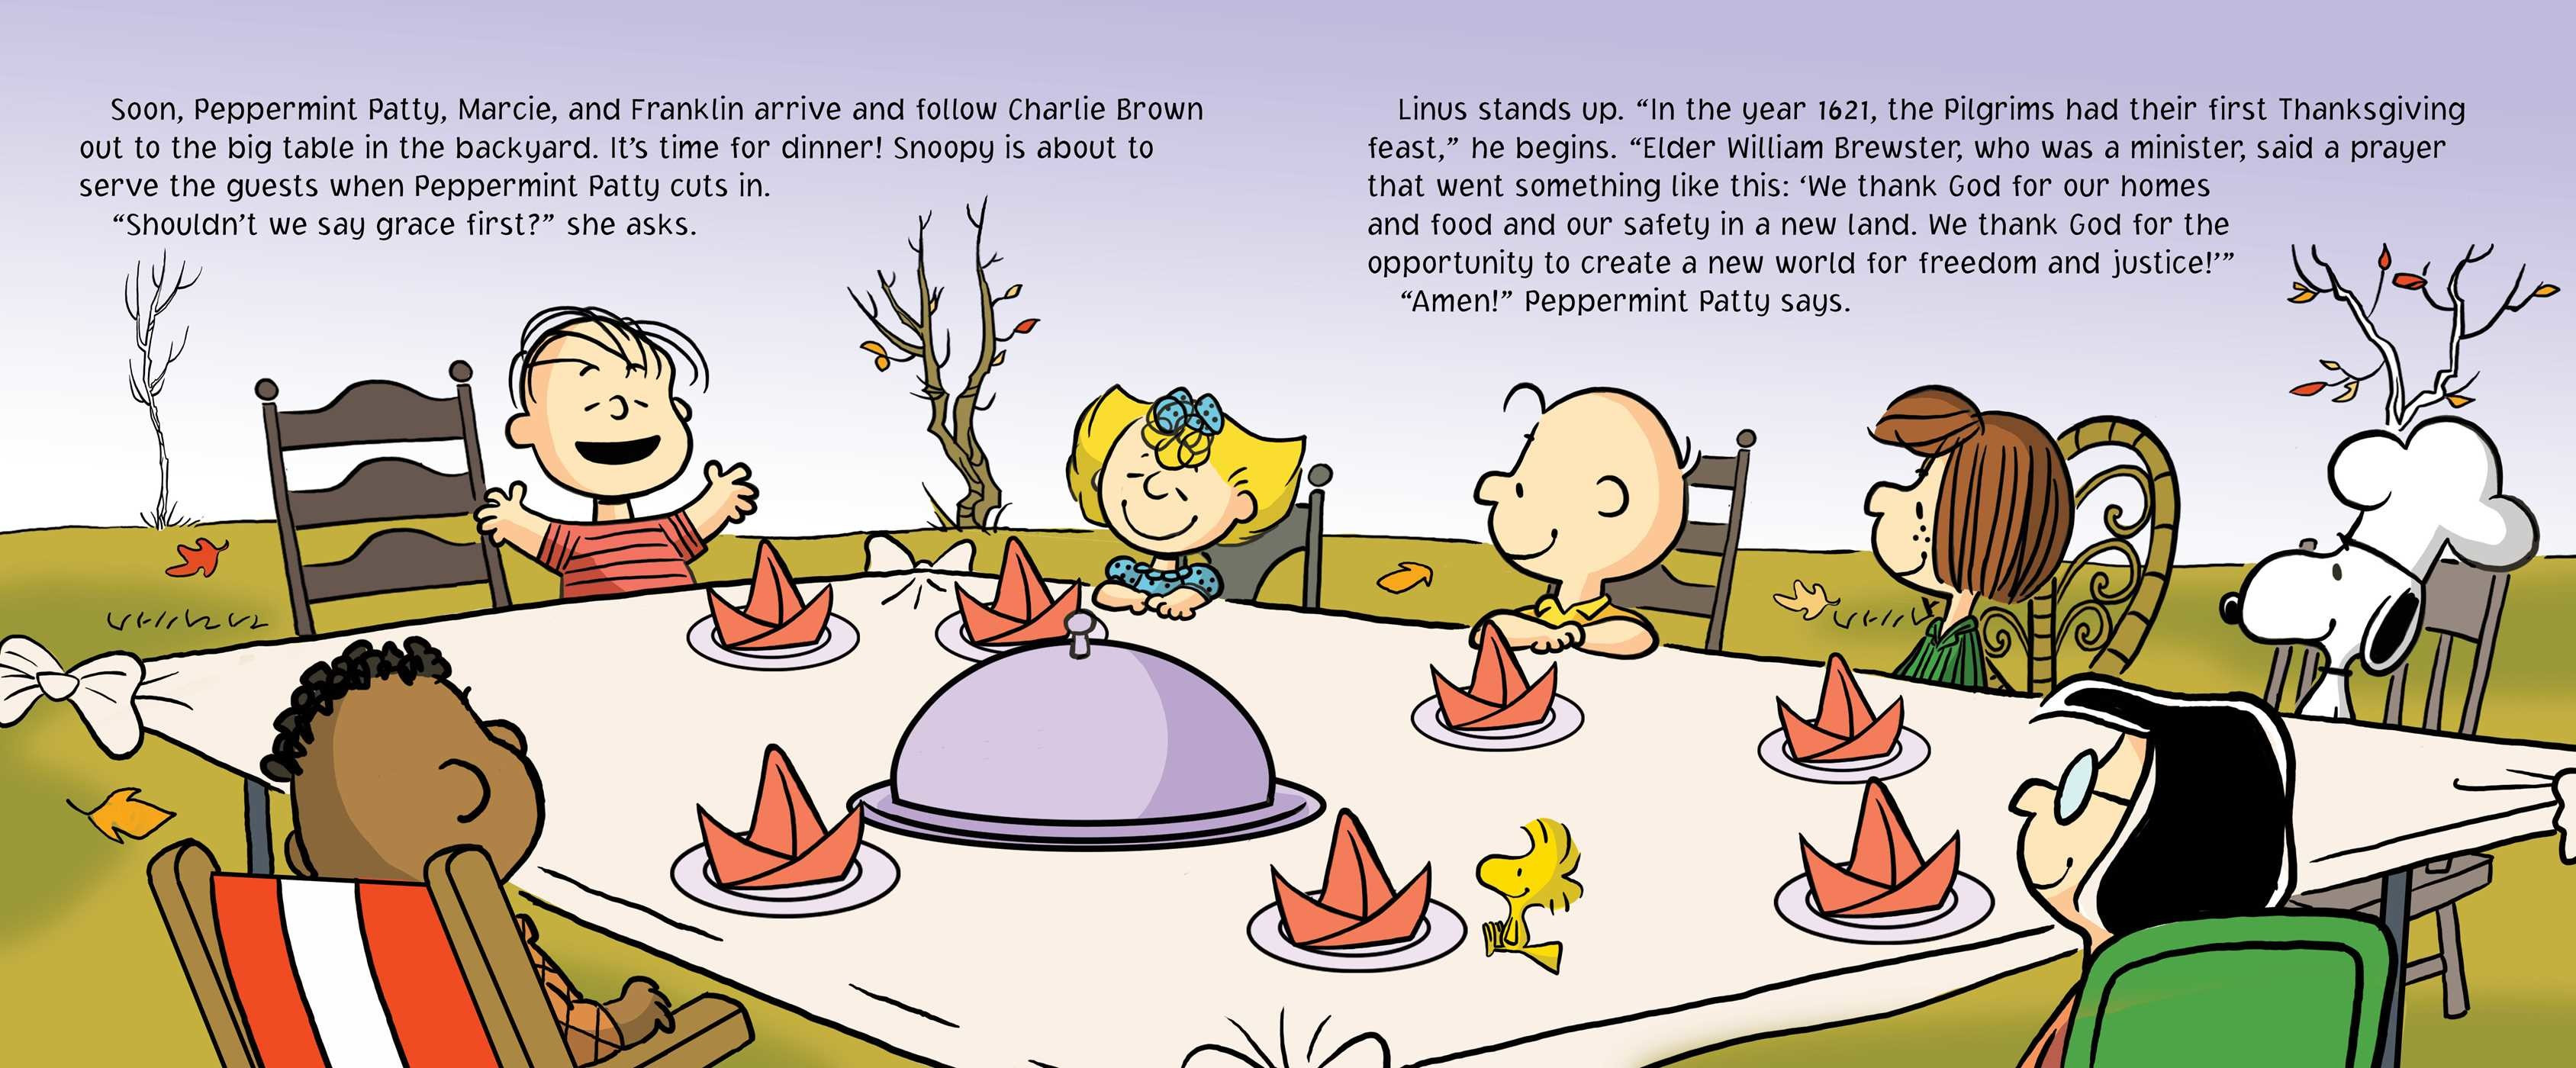 Charlie Brown Thanksgiving Dinner
 A Charlie Brown Thanksgiving